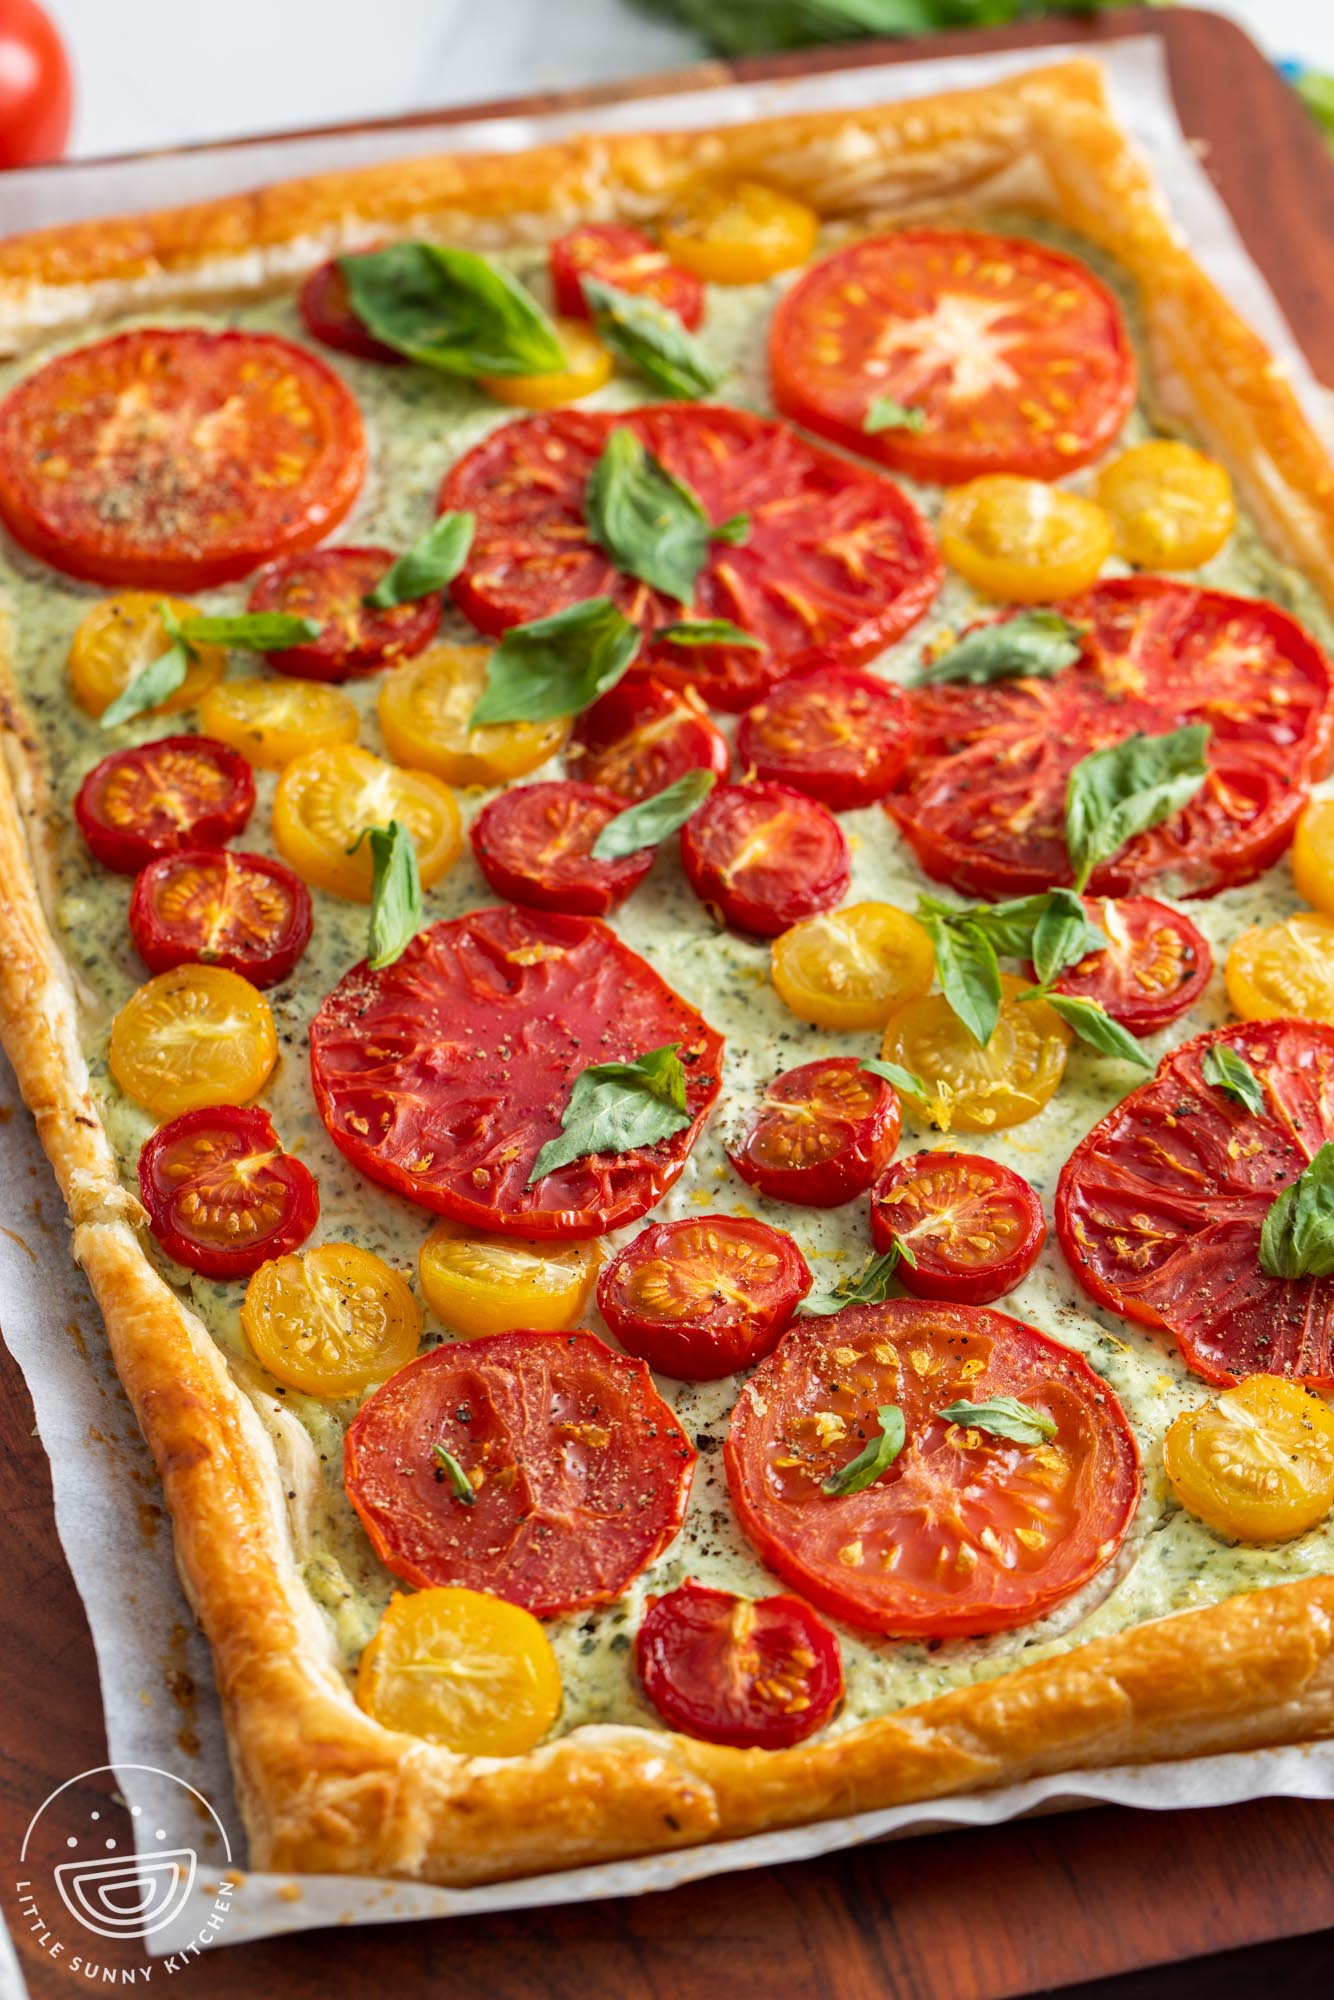 a homemade pastry tart with fresh sliced tomatoes and basil leaves.